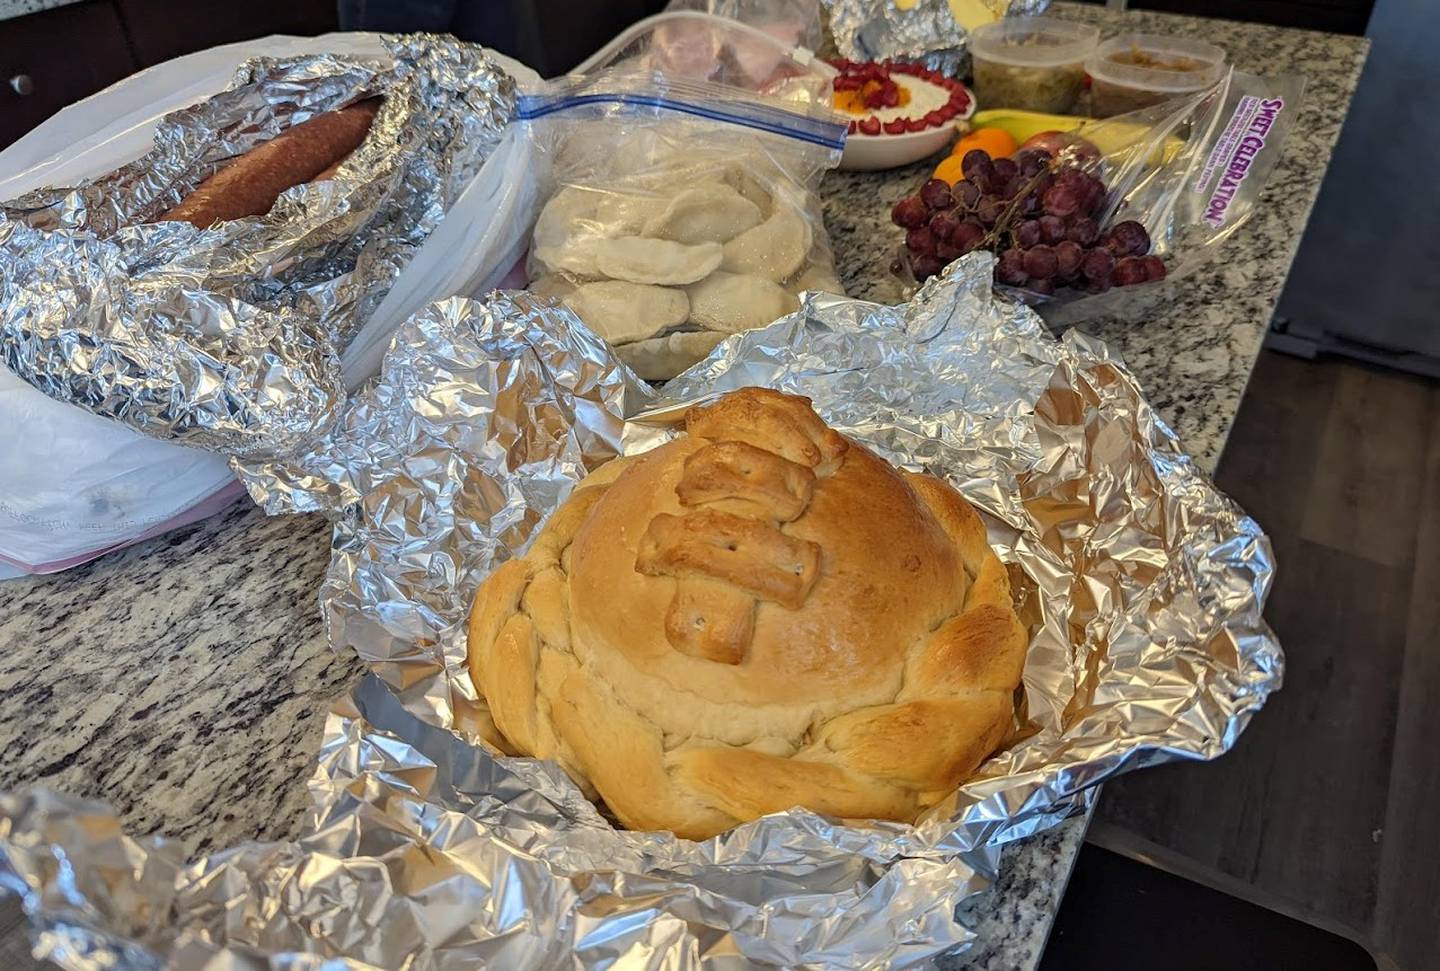 Pictured are some of the traditional foods eaten that Eastern Europeans serve for Orthodox Easter. That includes kielbasa an, pirohi, and pascha, a special Easter bread made with milk, eggs and butter.